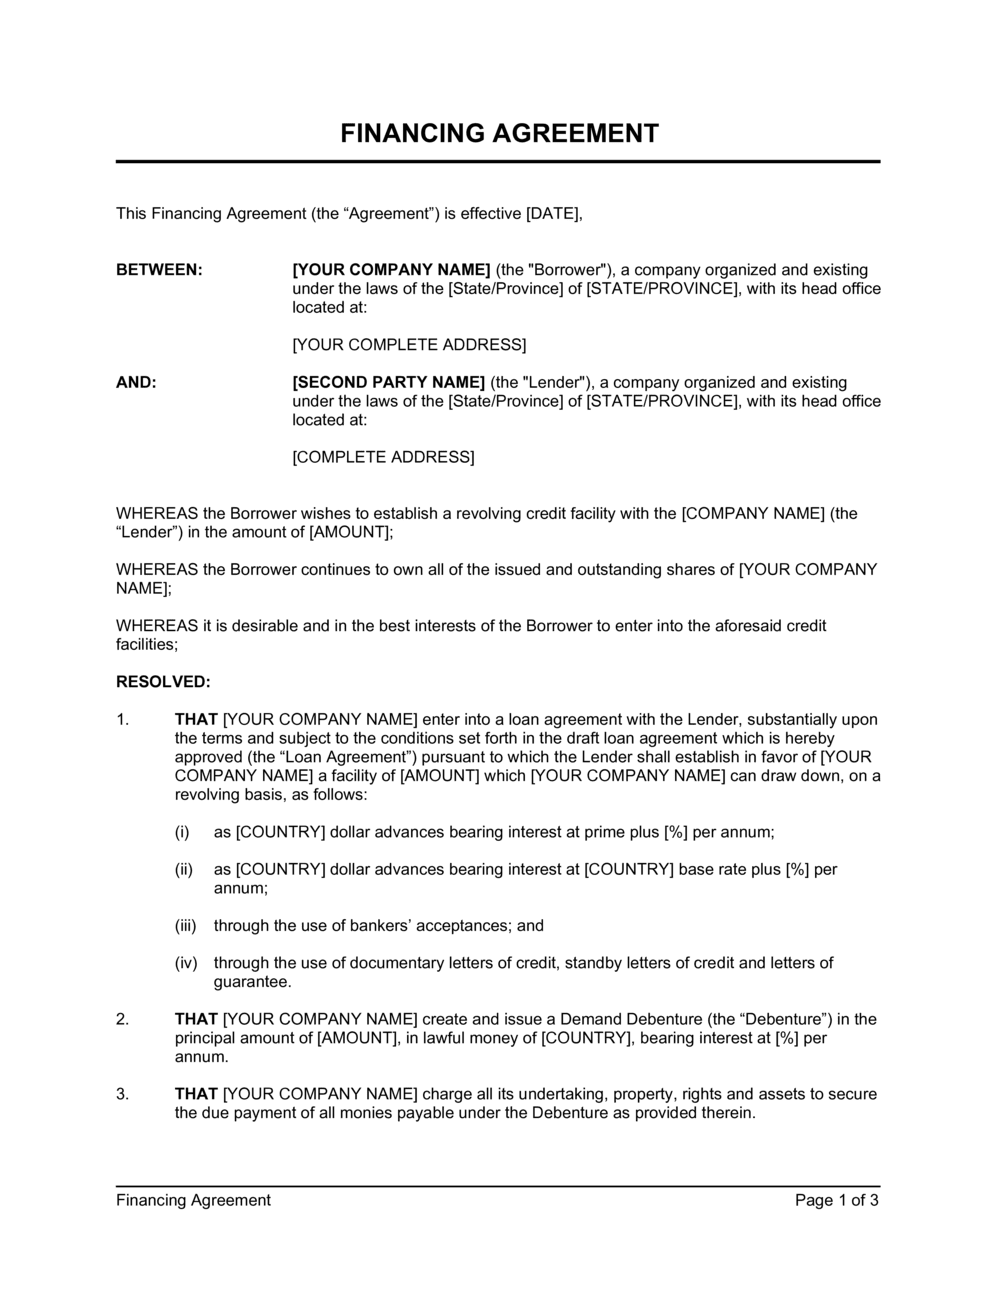 Financing Agreement Short Template  by Business-in-a-Box™ With revolving credit facility agreement template